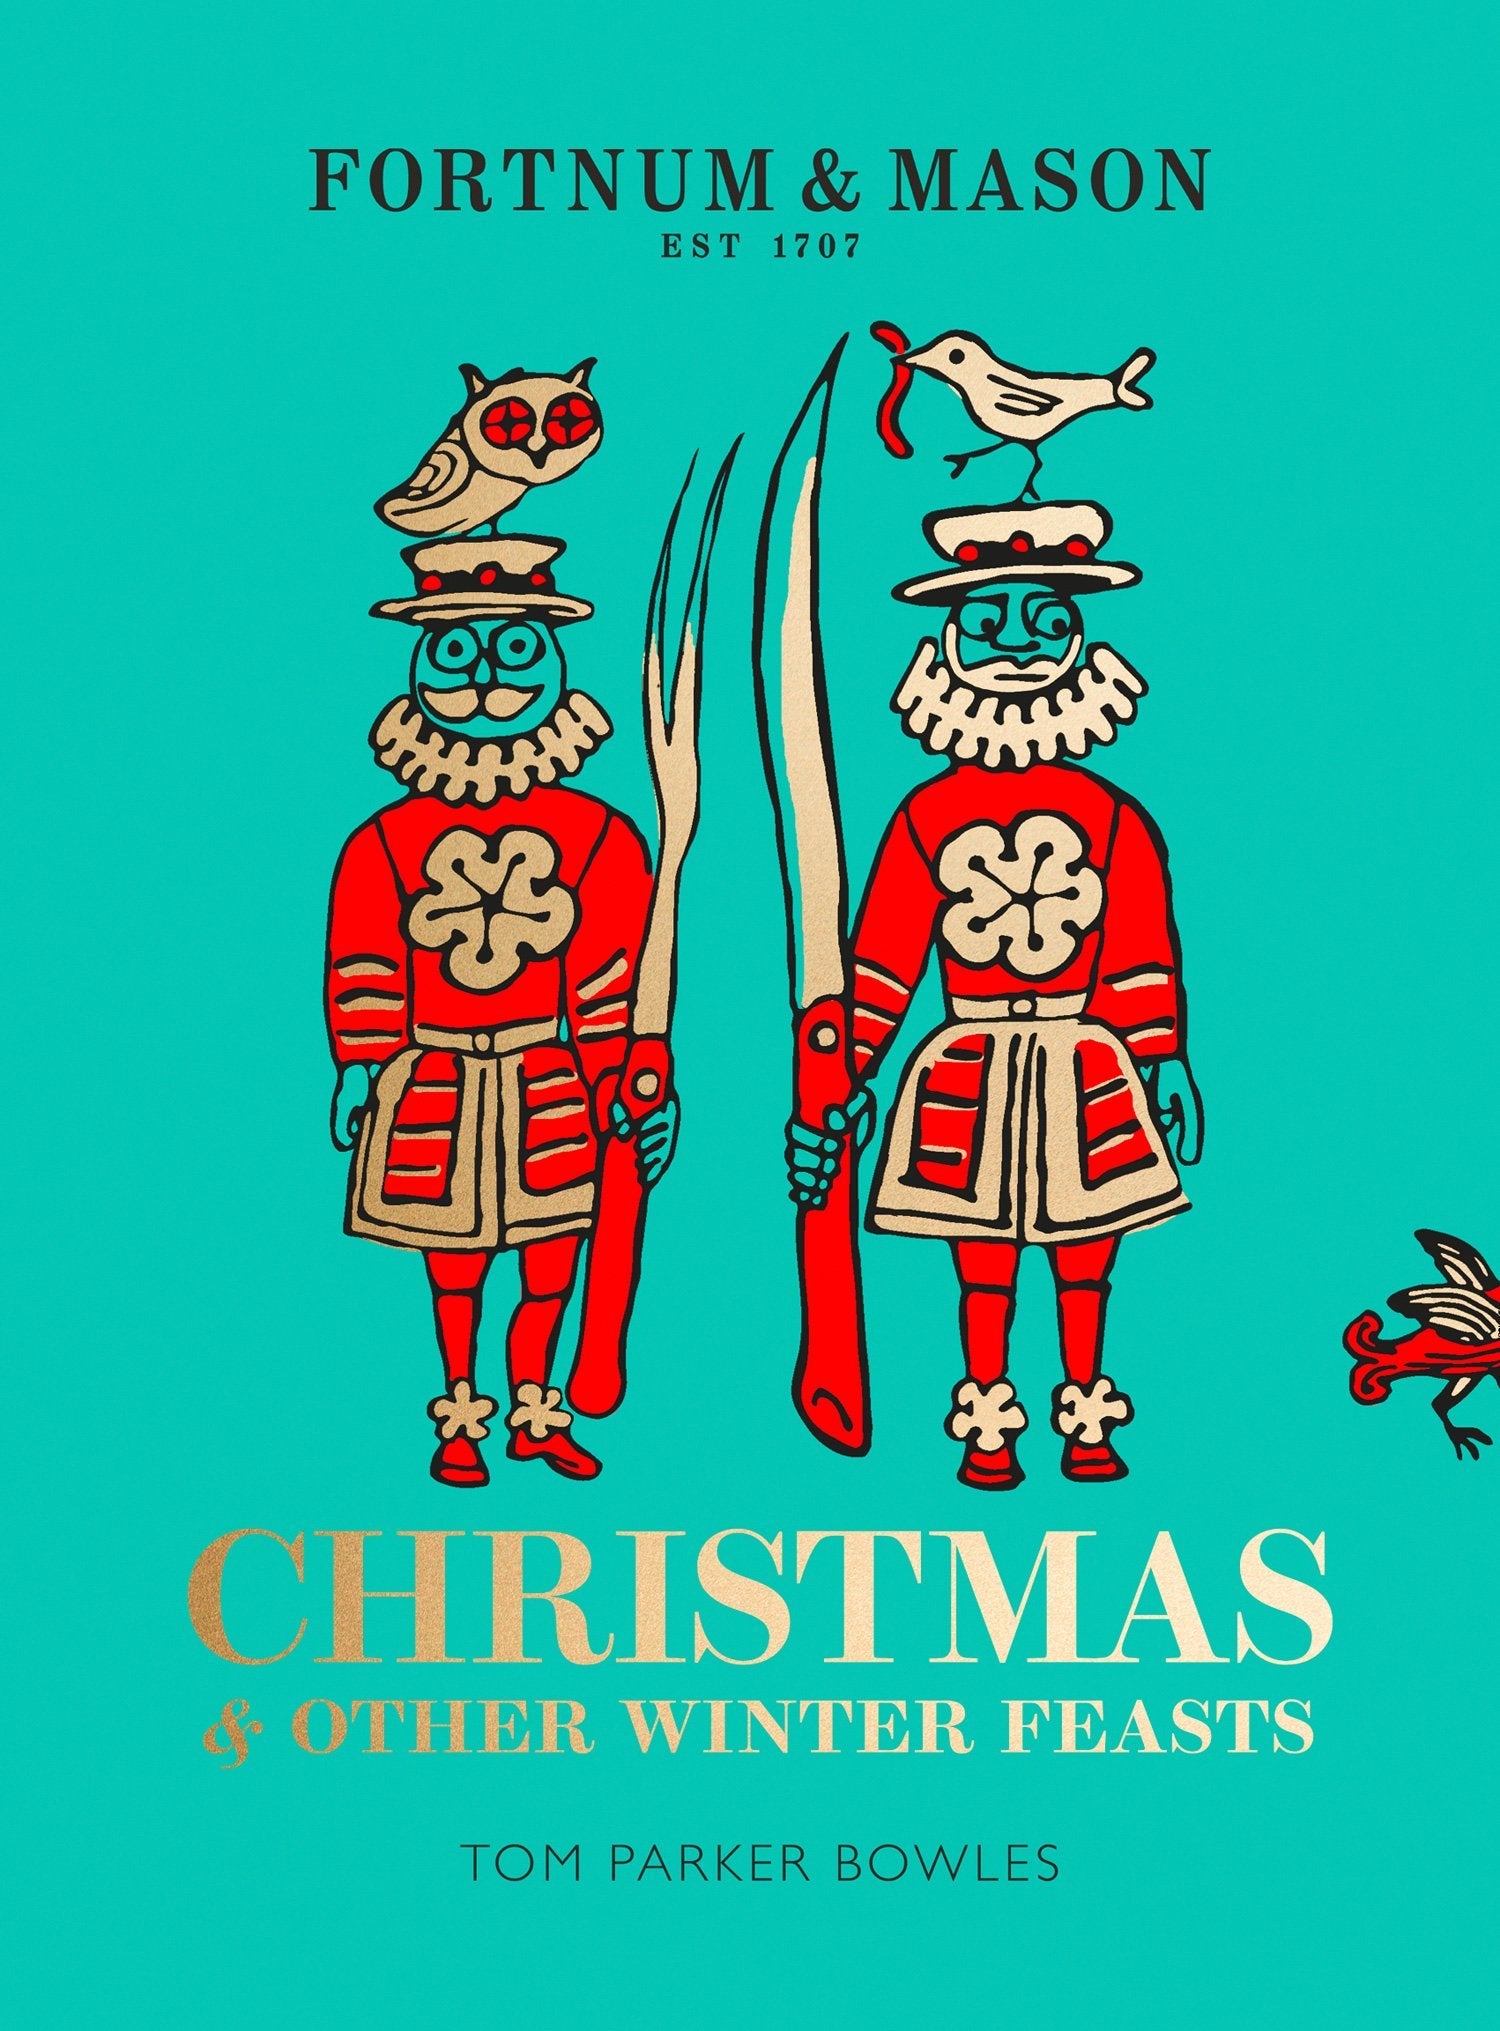 Fortnum & Mason: Christmas & Other Winter Feasts (Tom Parker Bowles)